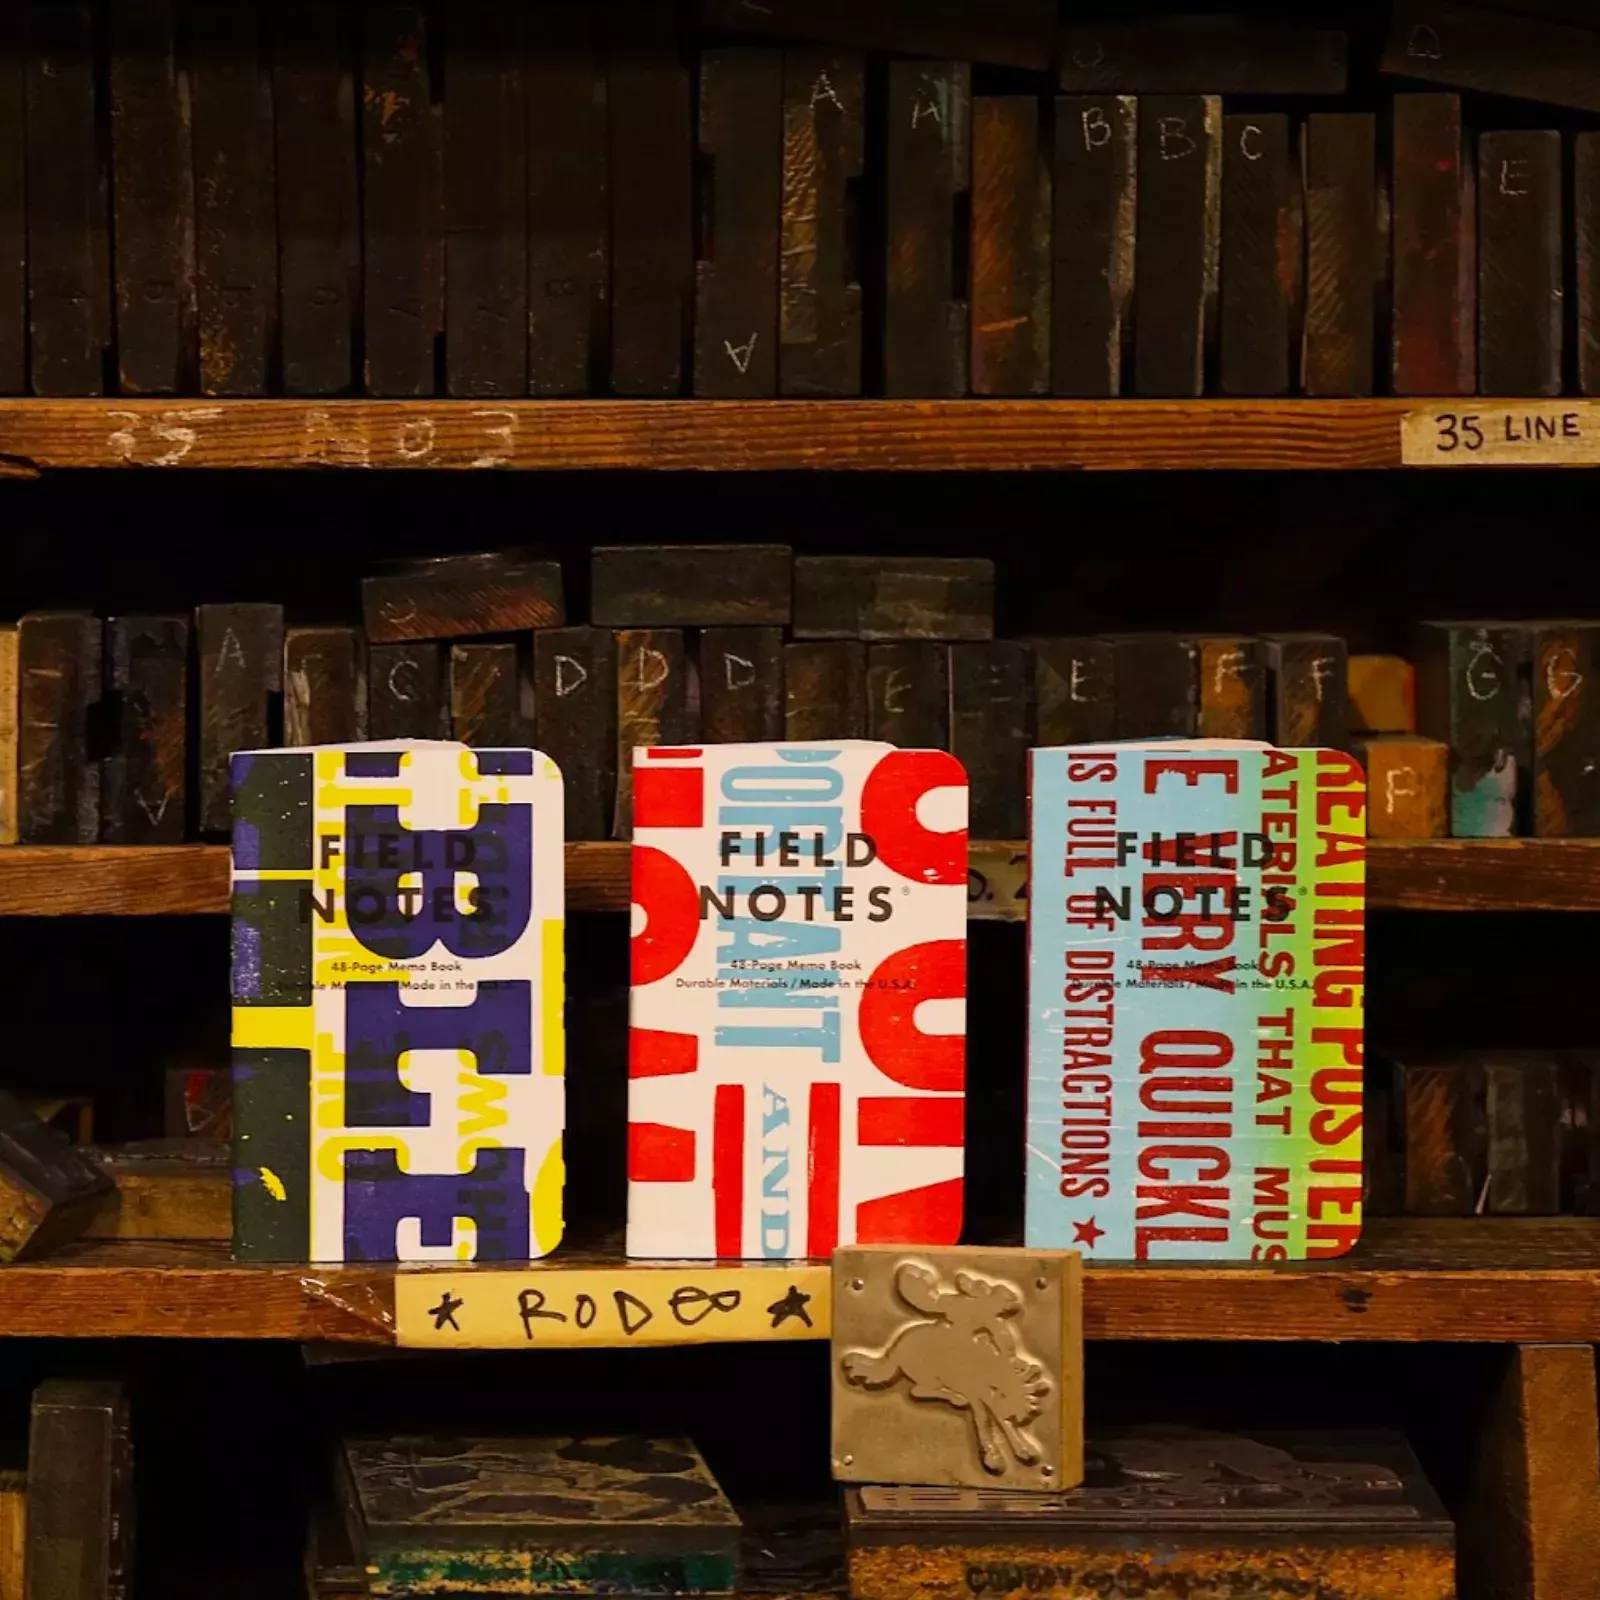 Field Notes and Hatch Show Print Come Together For Unique Letterpressed Memo Books